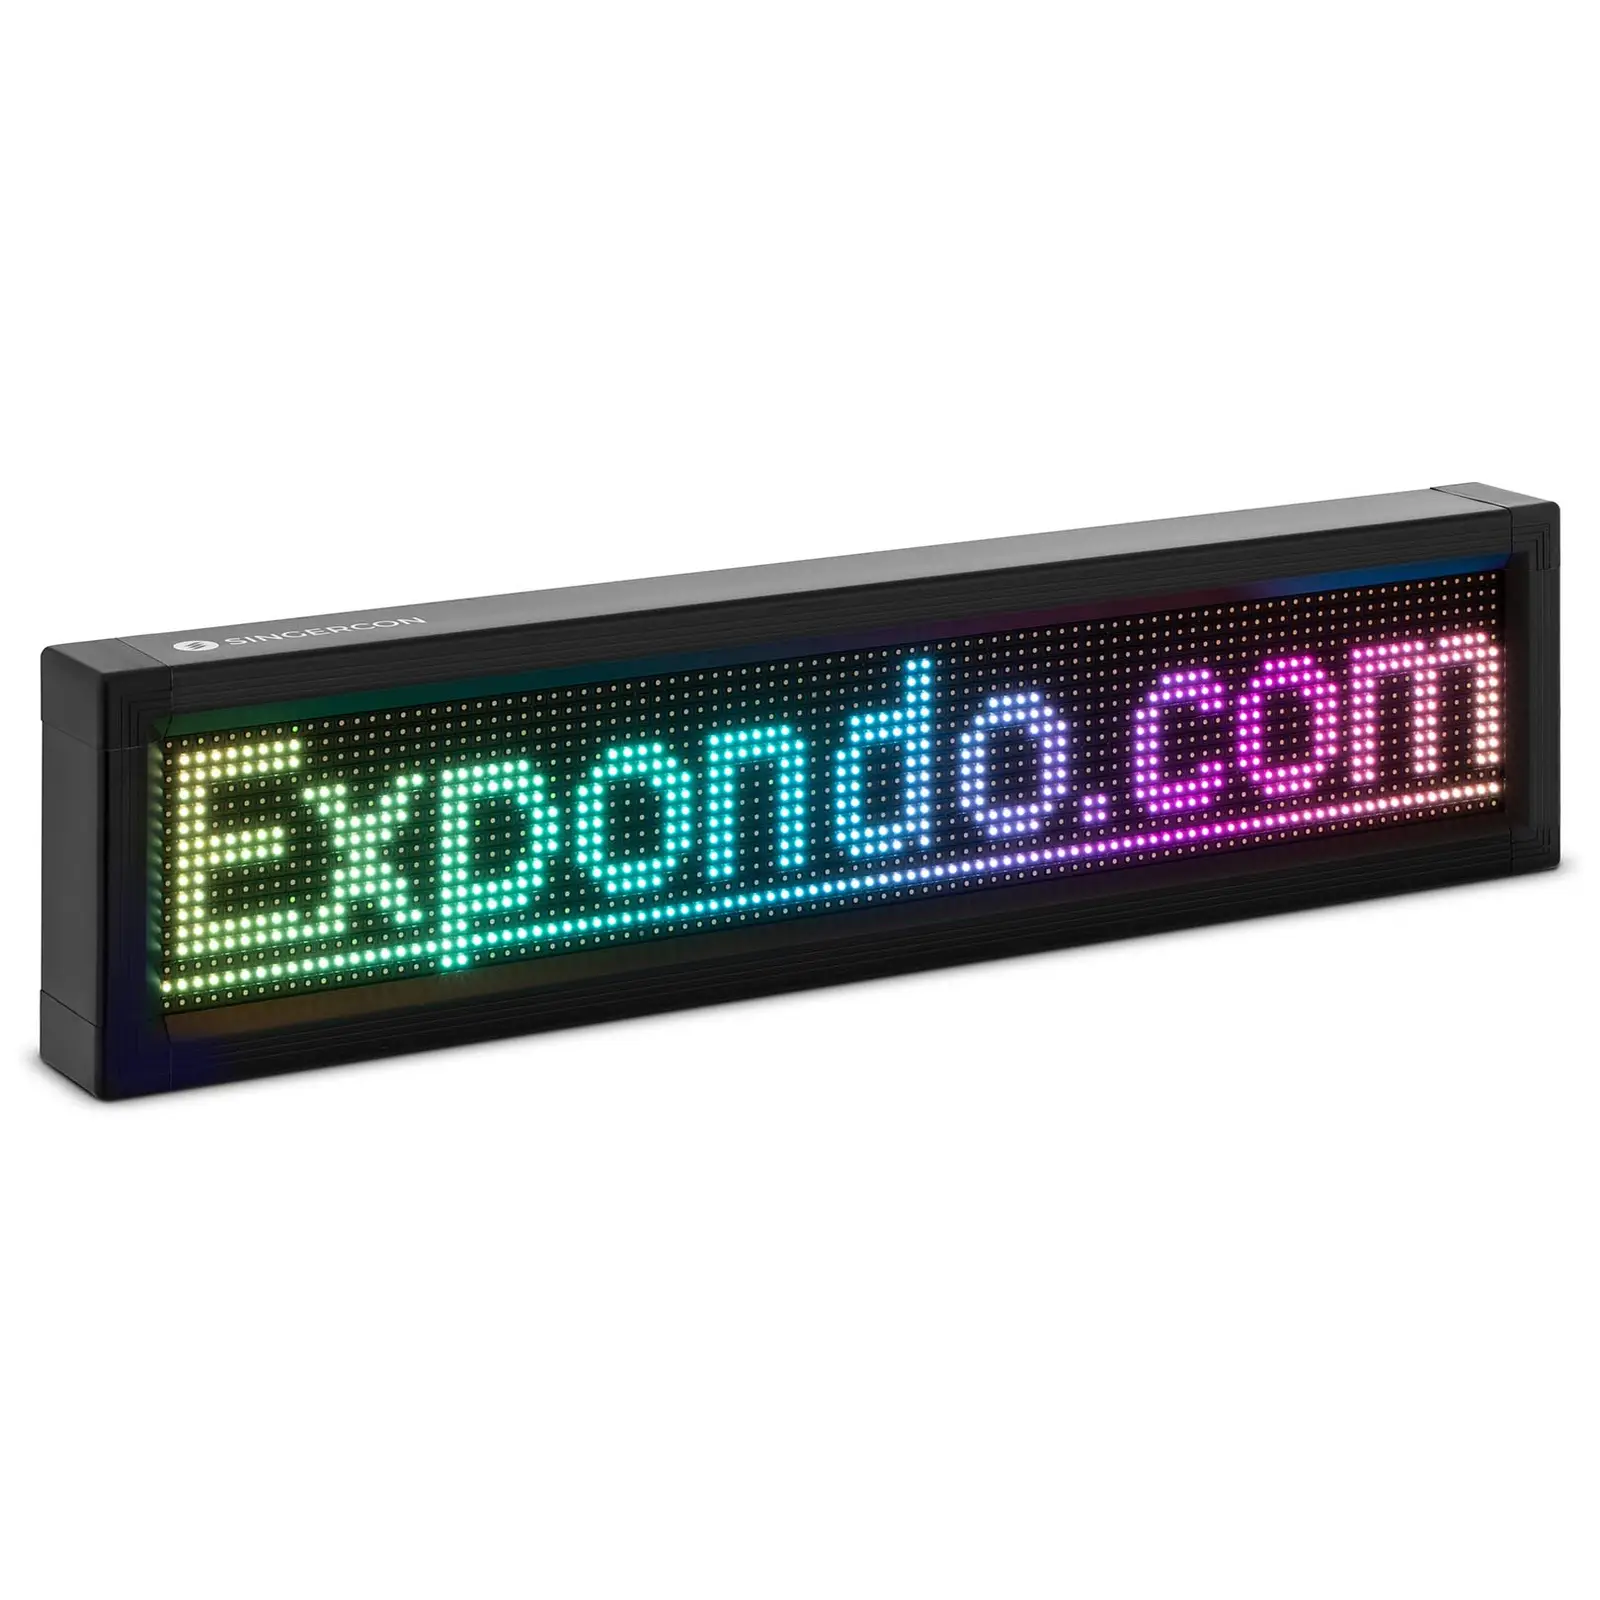 LED Display Board - 96 x 16 coloured LEDs - 67 x 19 cm - programmable via iOS / Android